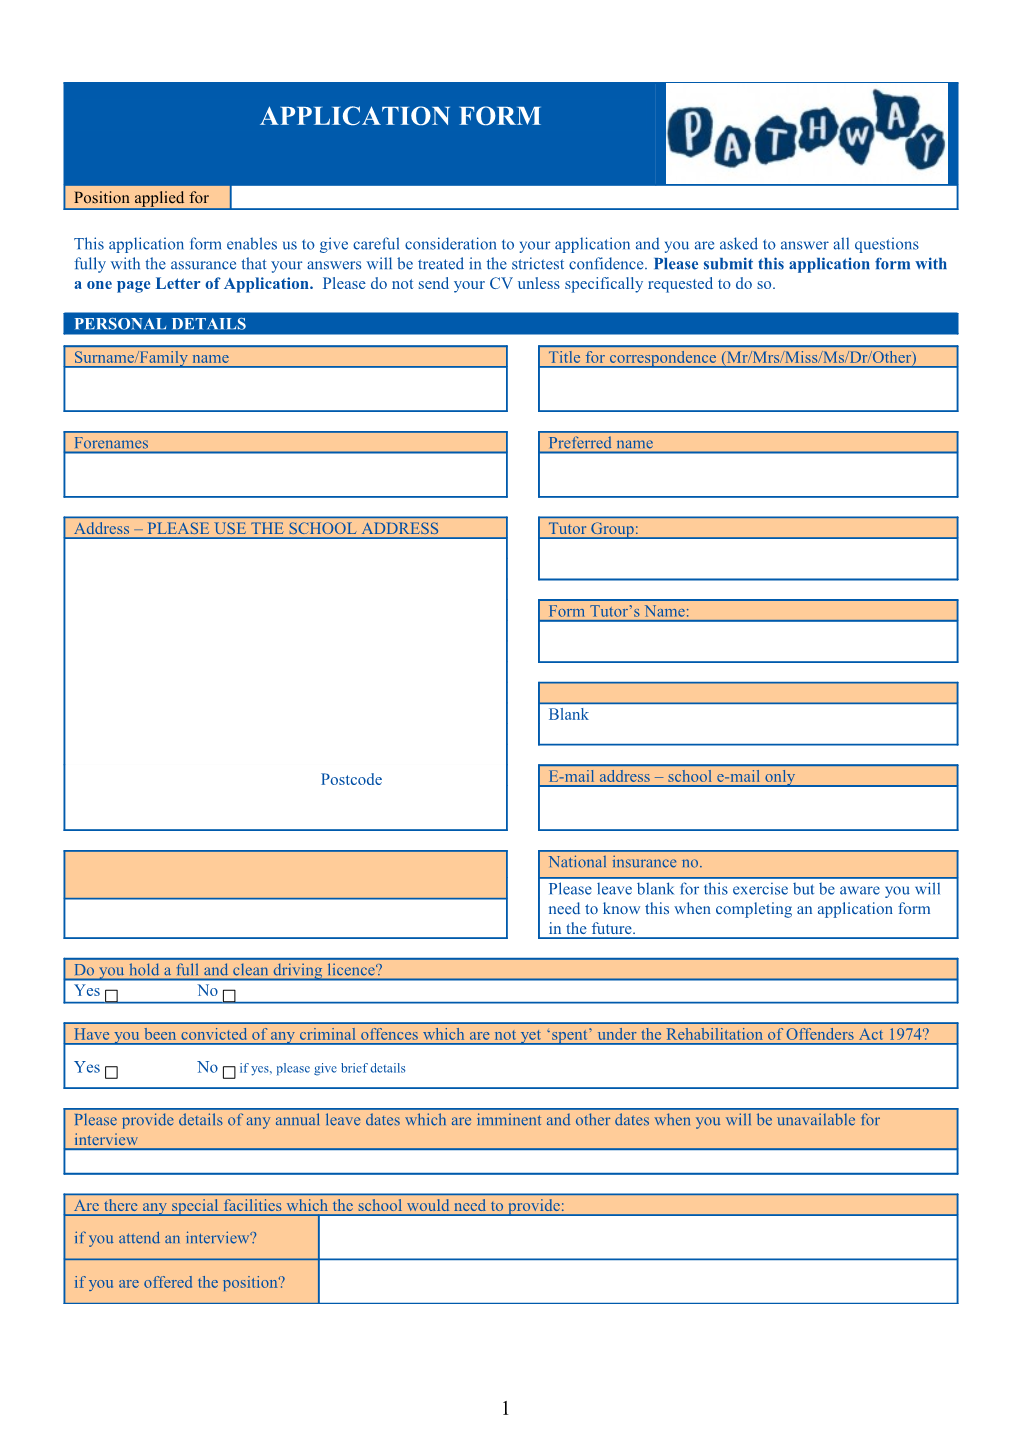 Application Form (Word Doc)